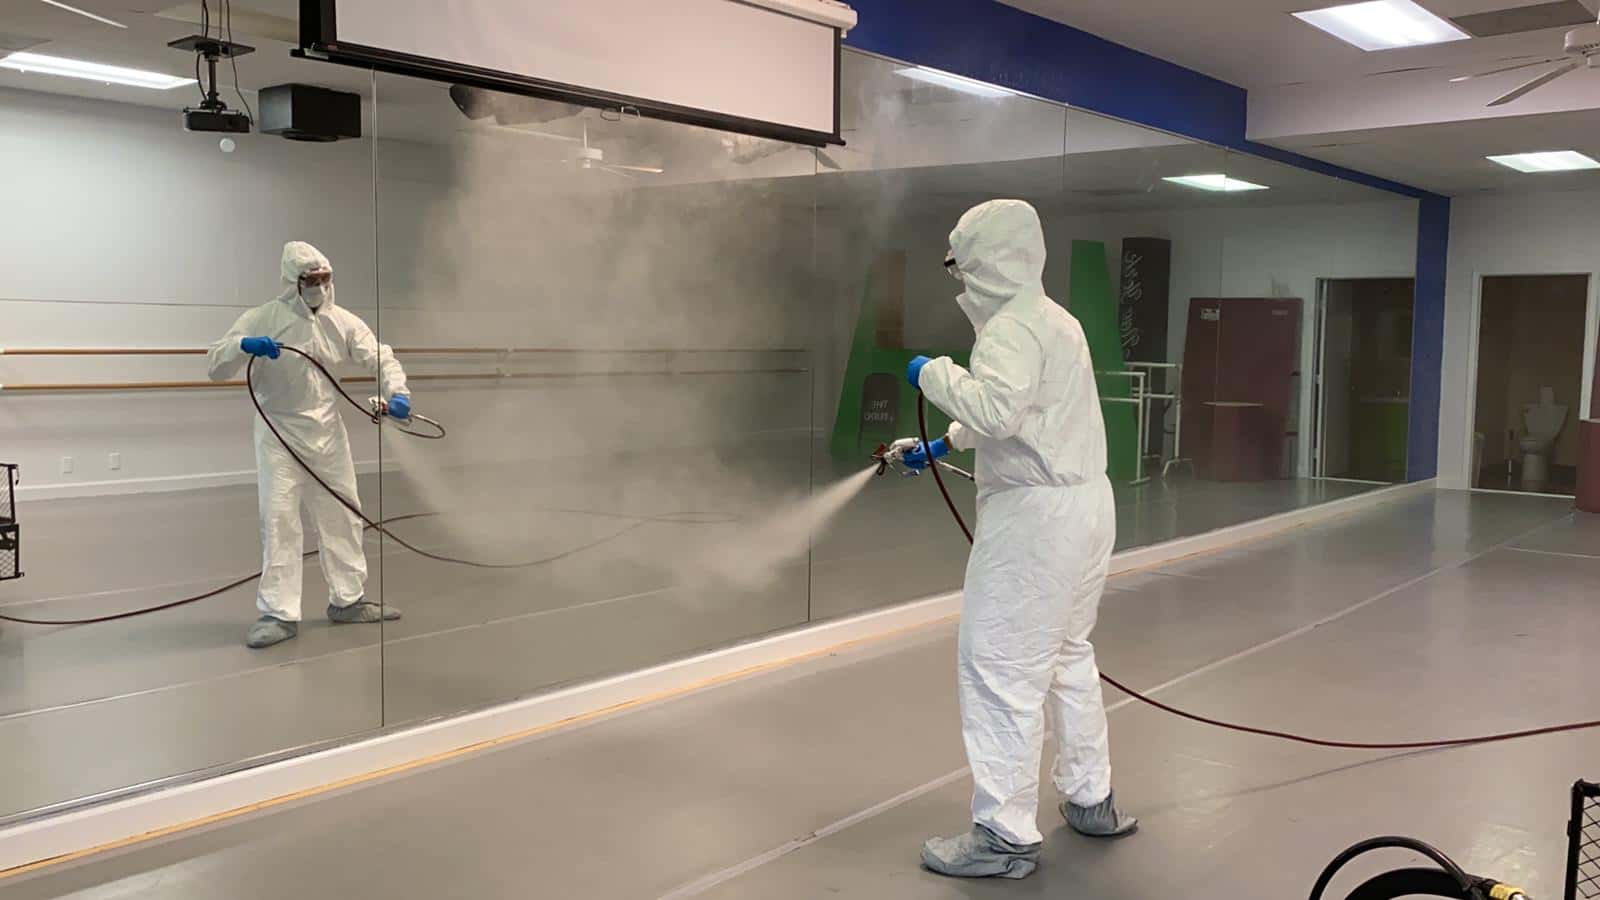 Ahead of the Curve with Vapor Sanitization | Crystal Cleaning Janitorial